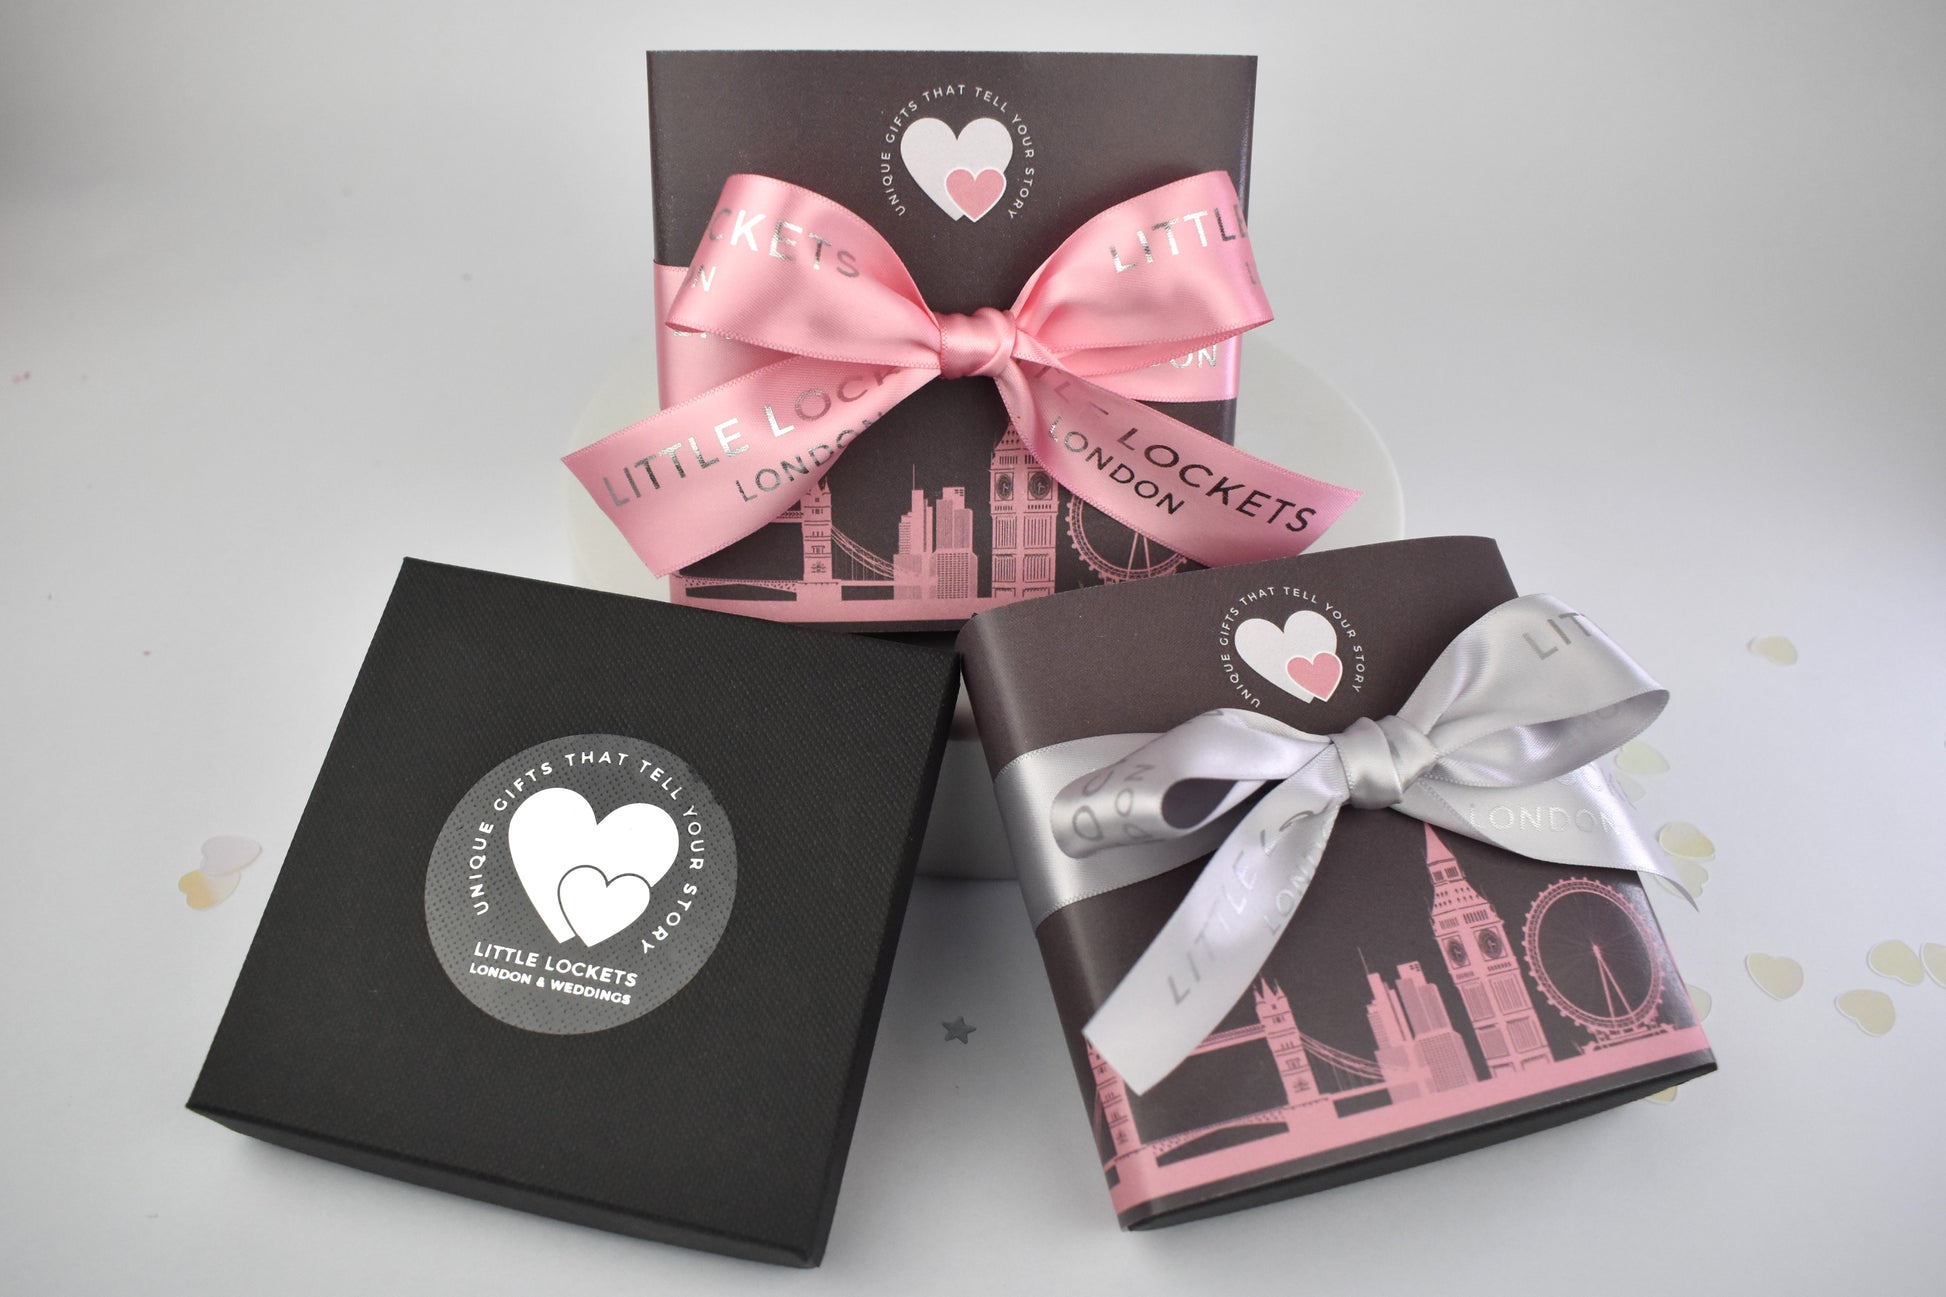 Your gift will arrive in a branded gift box or upgrade to a London skyline wrap with pink or grey ribbon tie.